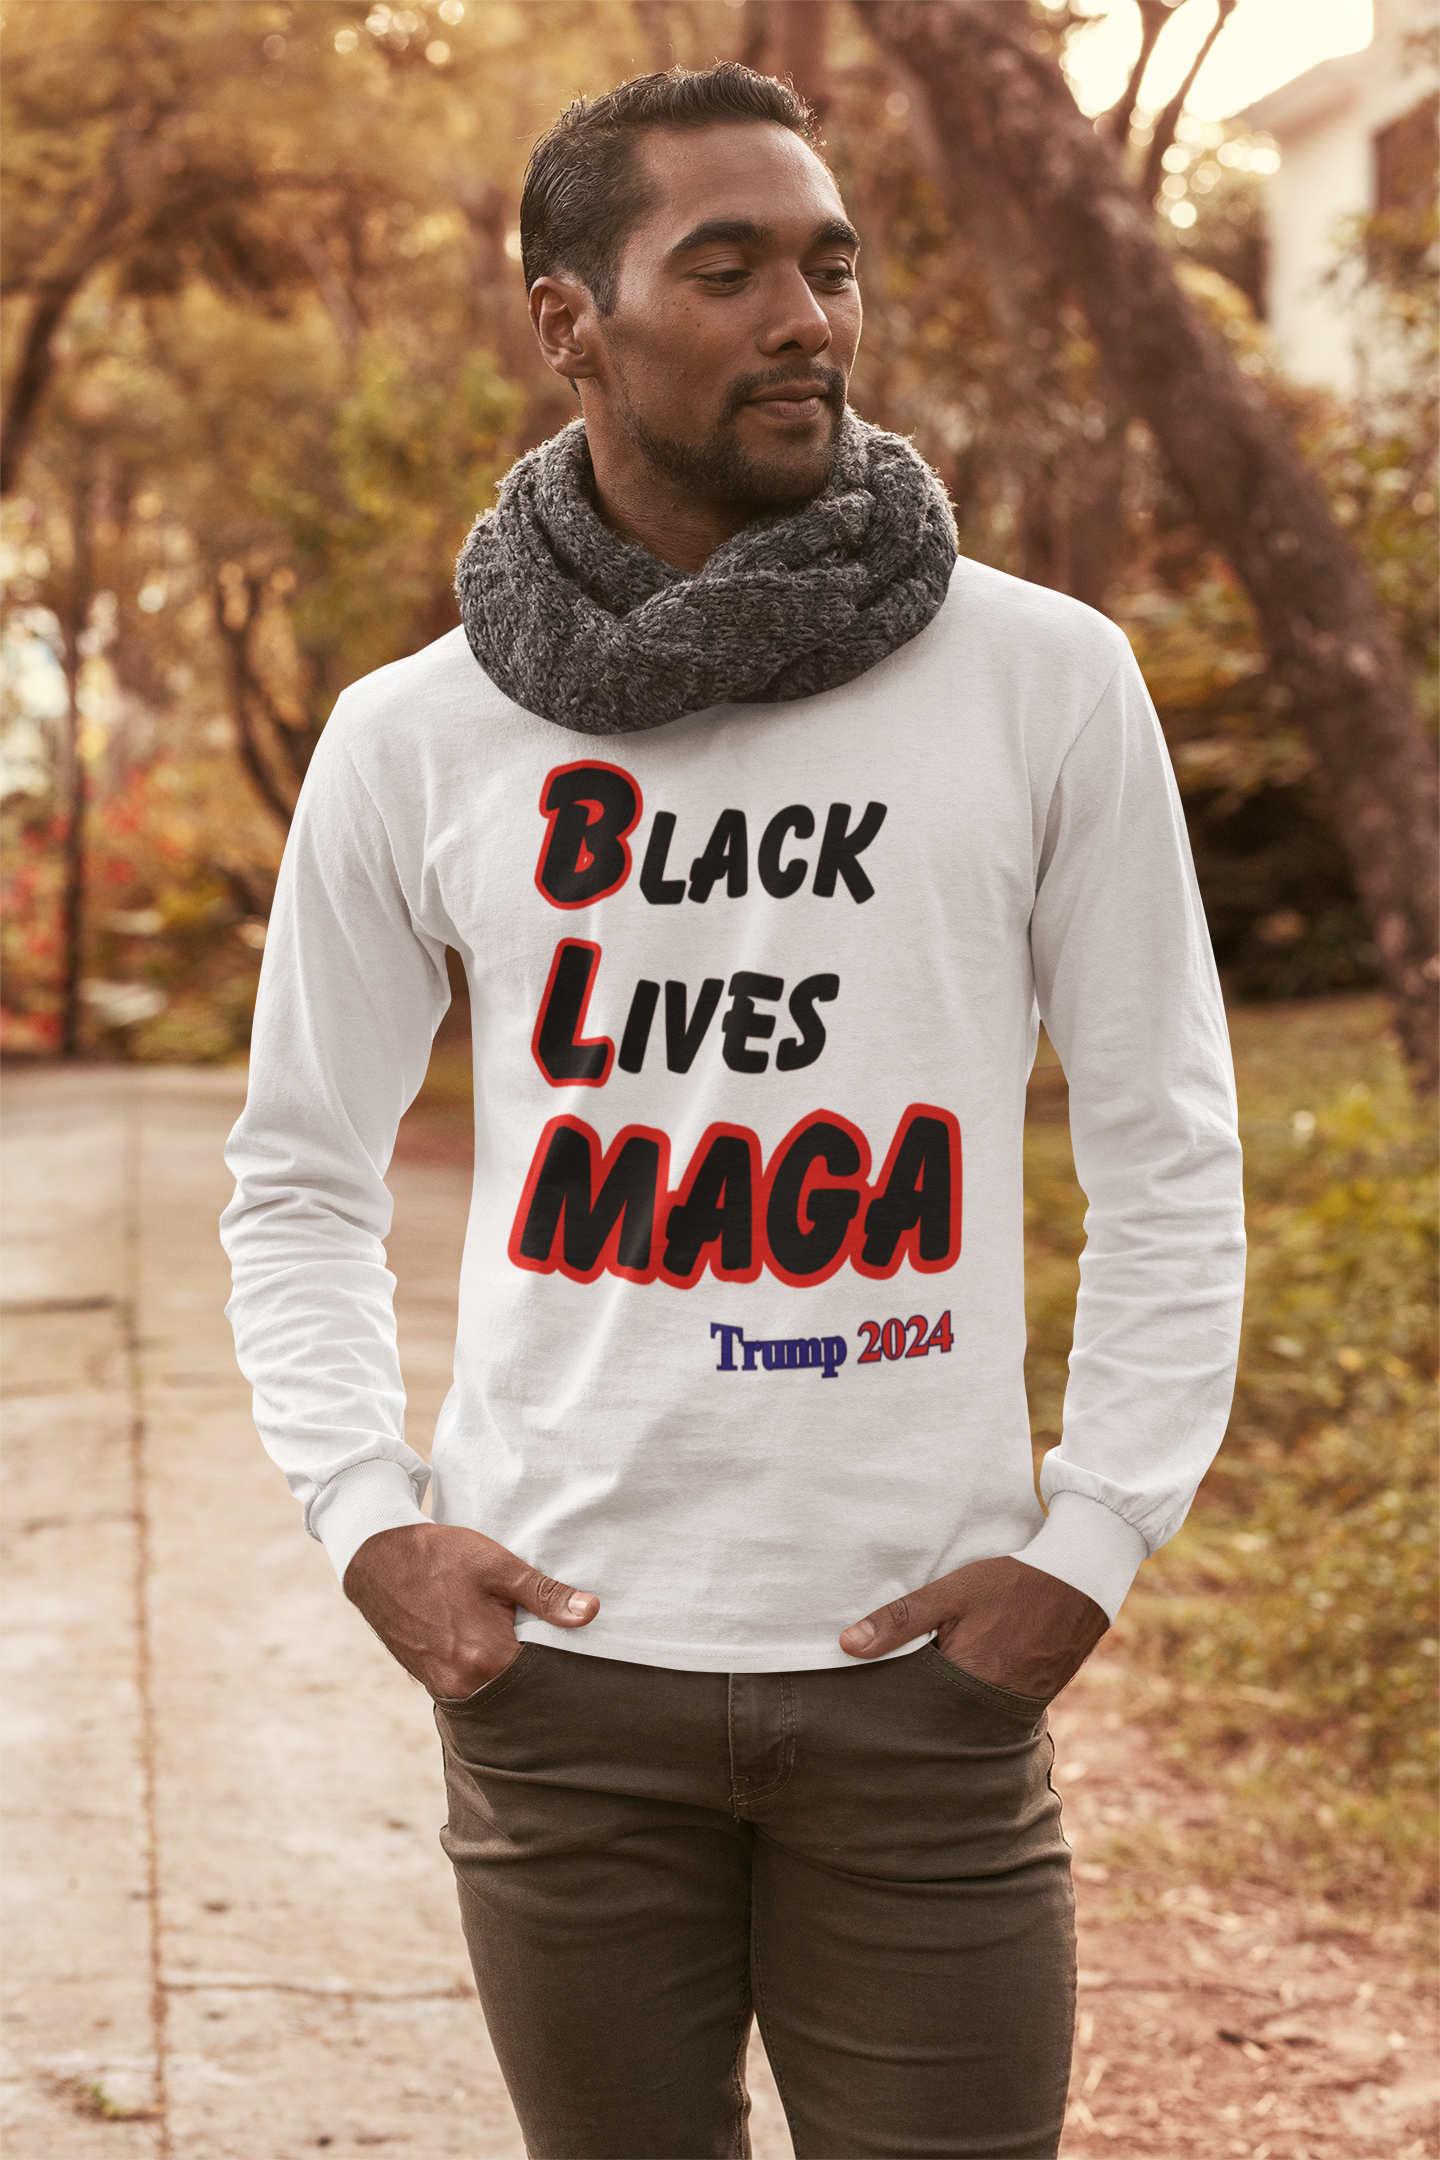 ... BLACK LIVES MAGA Fitted Light Weight Patriotic Biker Long Sleeve T-Shirt (XS-3XL):  Men's Bella+Canvas 3501 - FREE SHIPPING